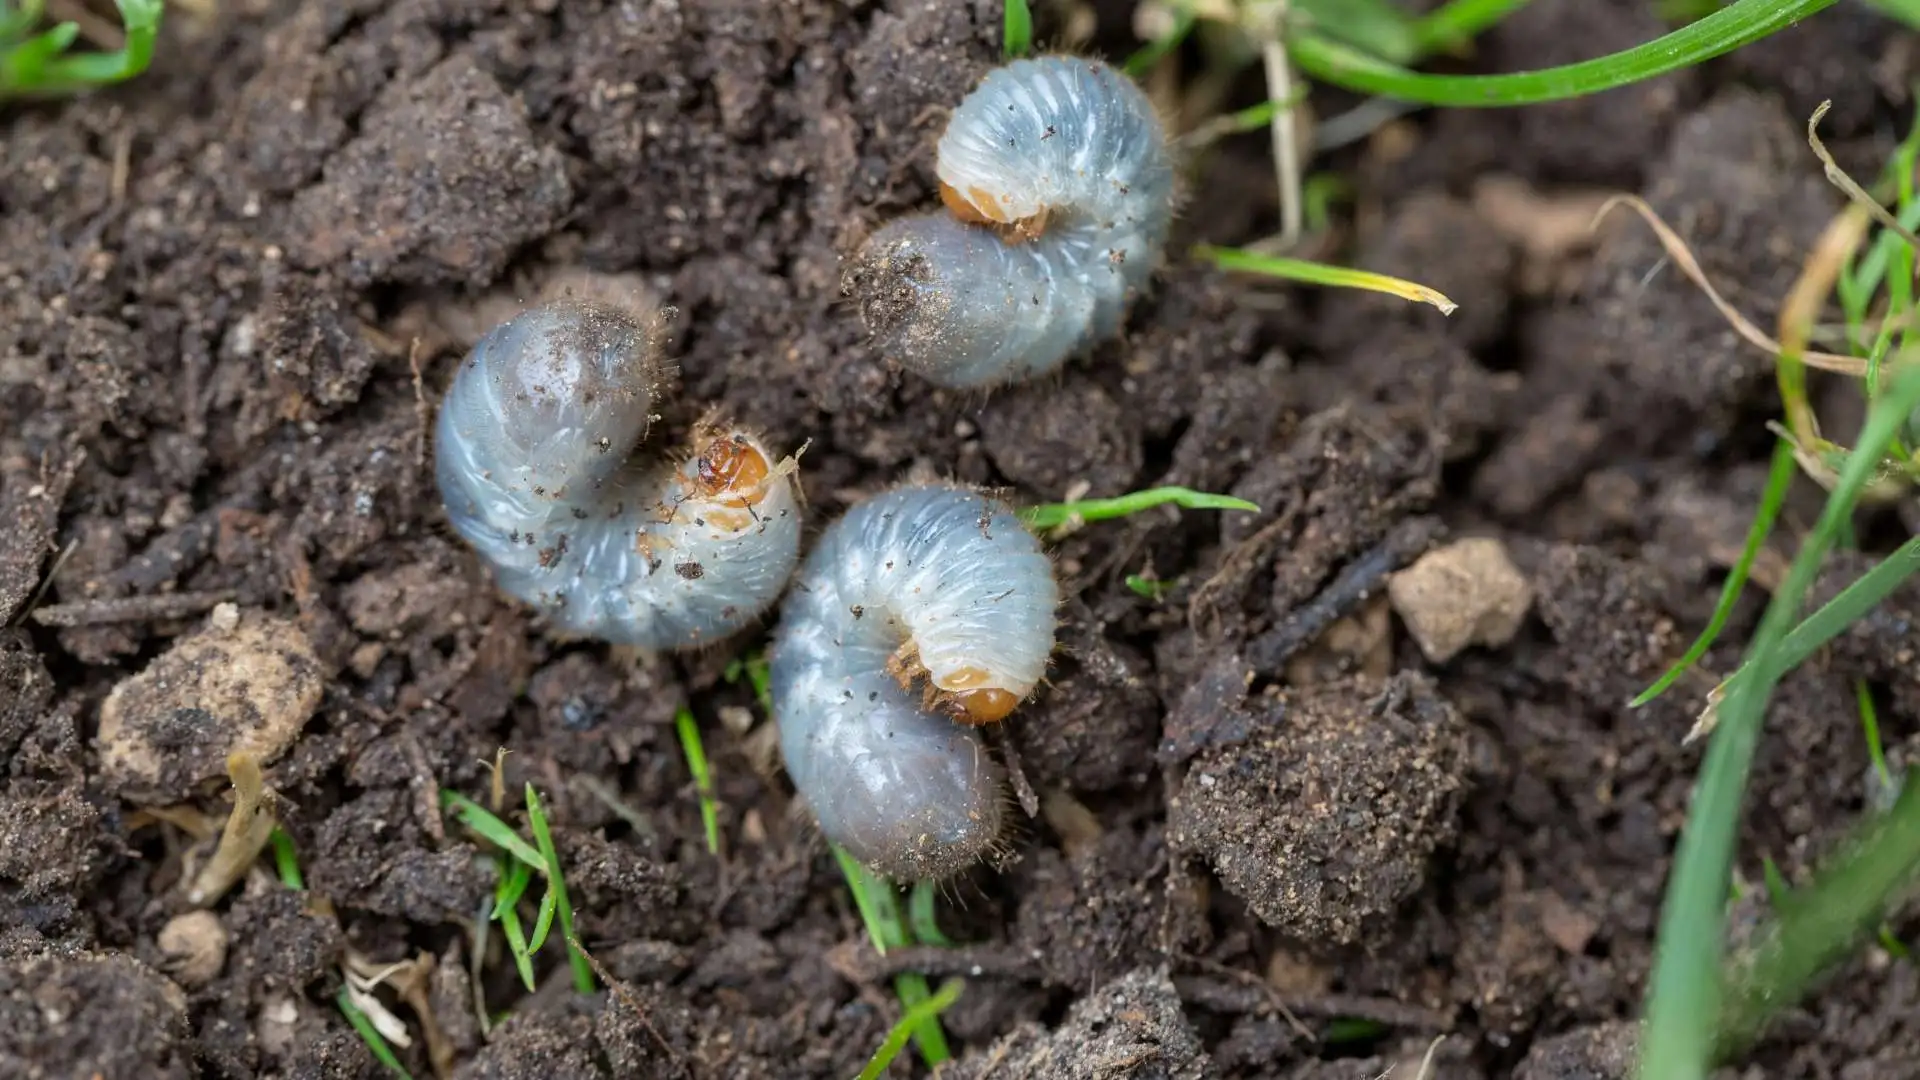 Grubs found in soil in Bee Cave, TX.